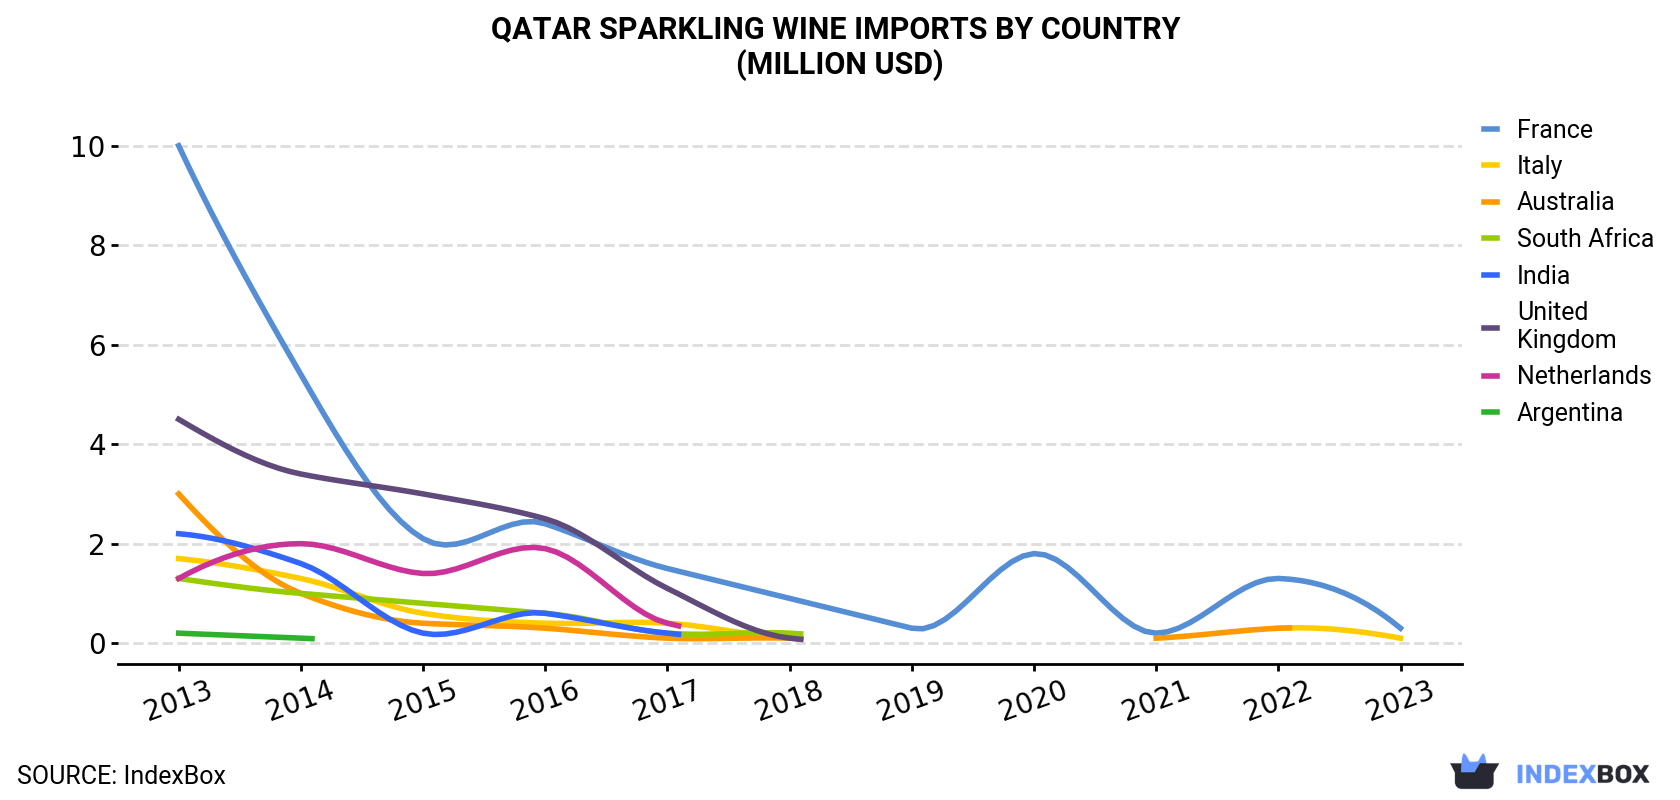 Qatar Sparkling Wine Imports By Country (Million USD)